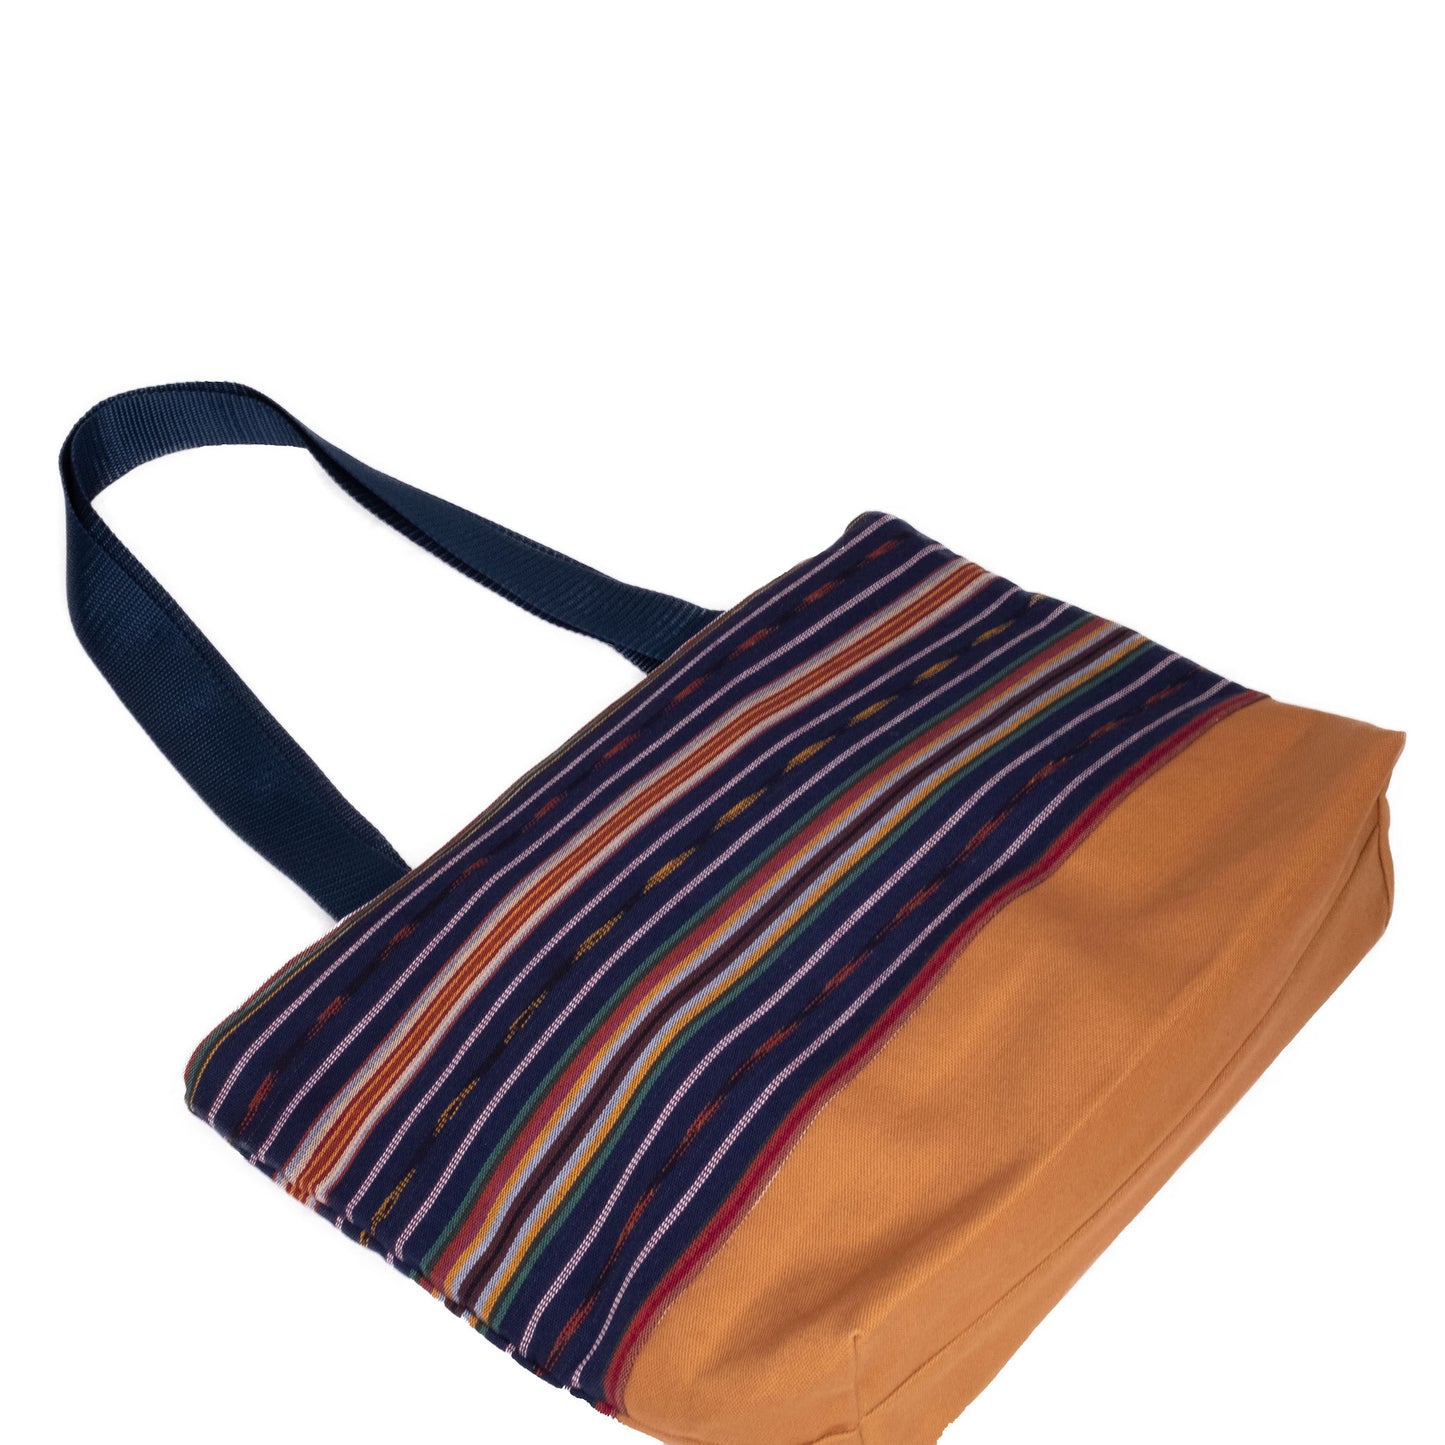 Handmade tote bag in brown featuring multicolored handwoven textiles from Guatemala.